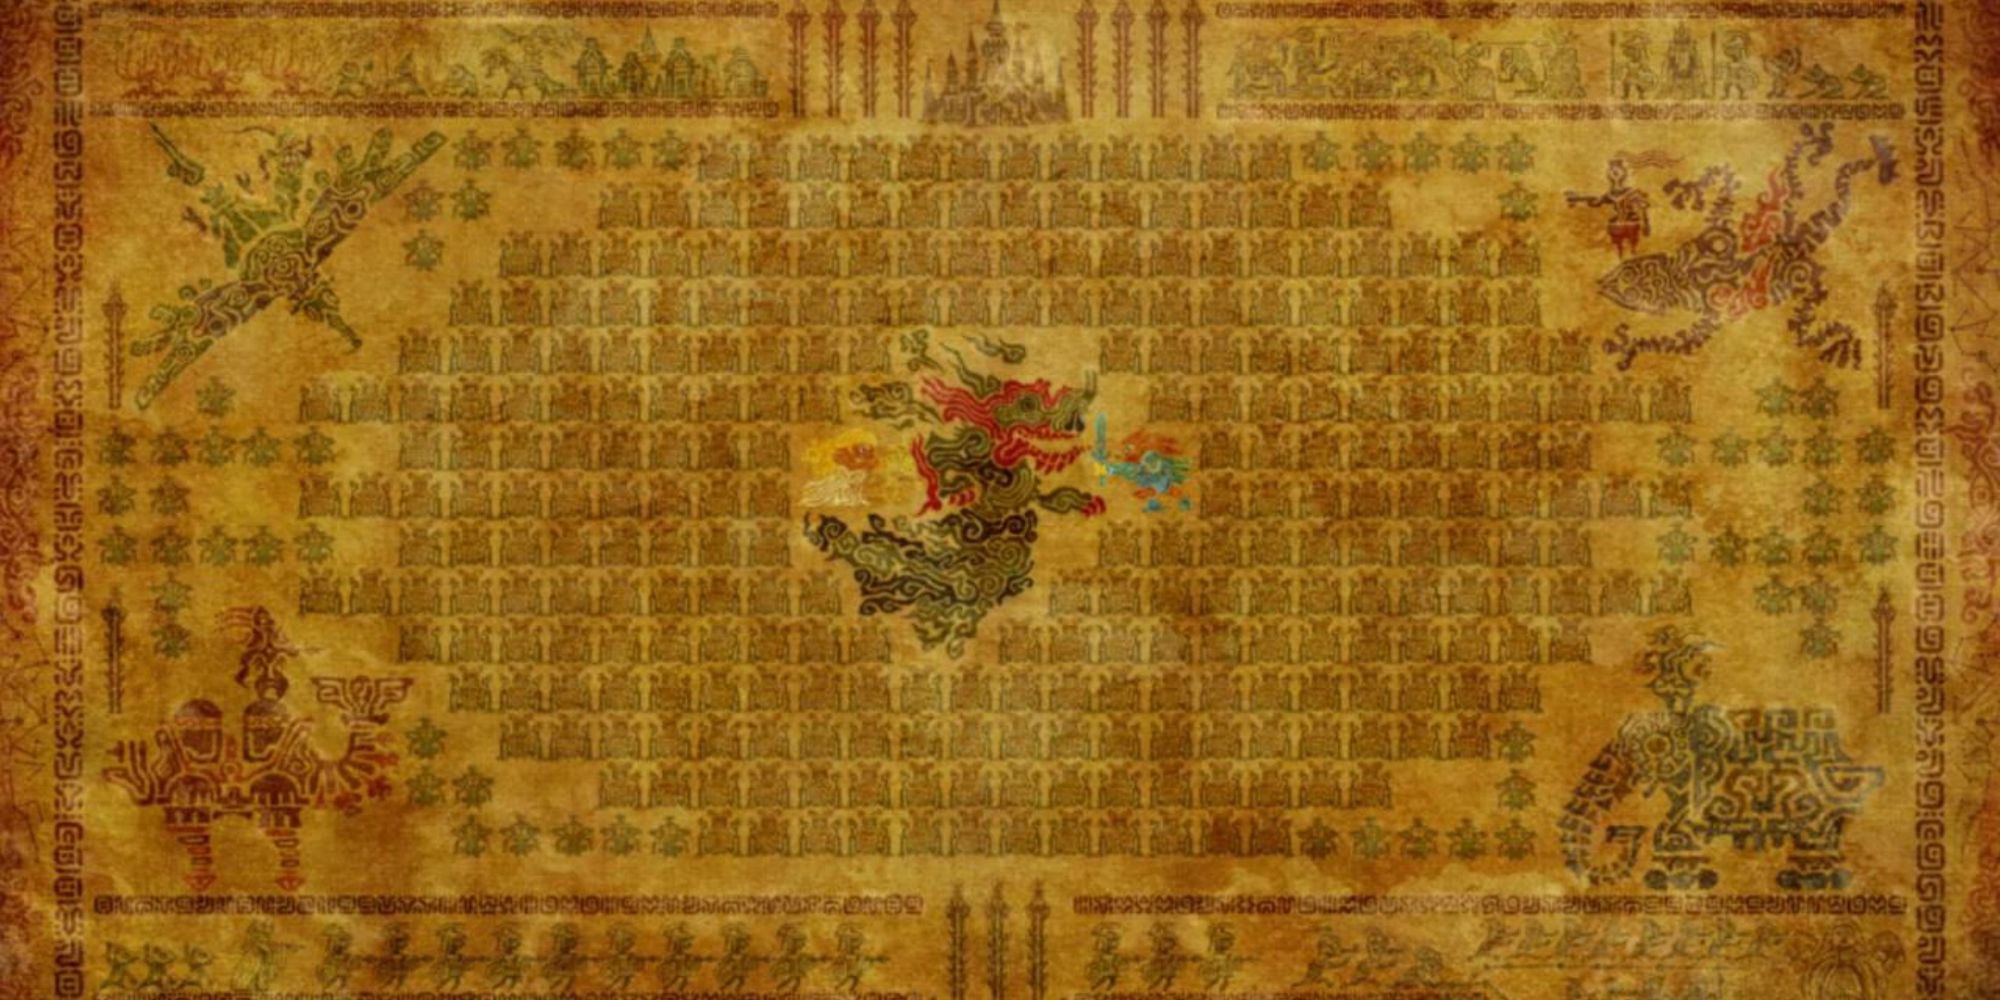 The Sheikah's tapestry depicting the battle 10,000 years ago between Calamity Ganon, the Princess, the Hero, the guardians and the Divine Beasts.